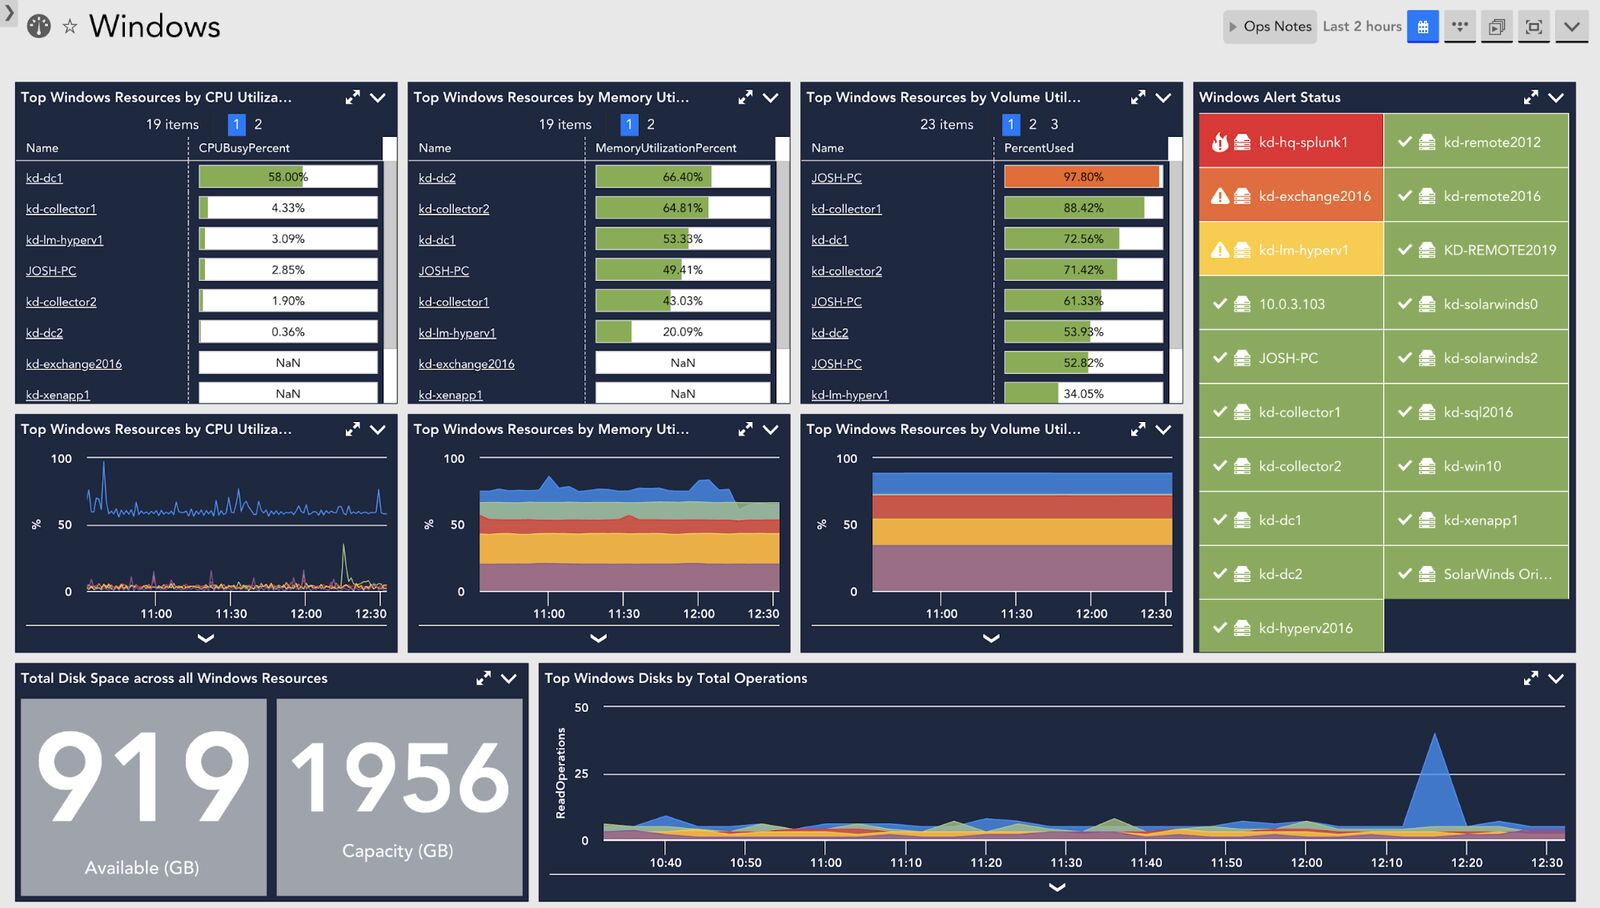 LogicMonitor overview dashboard